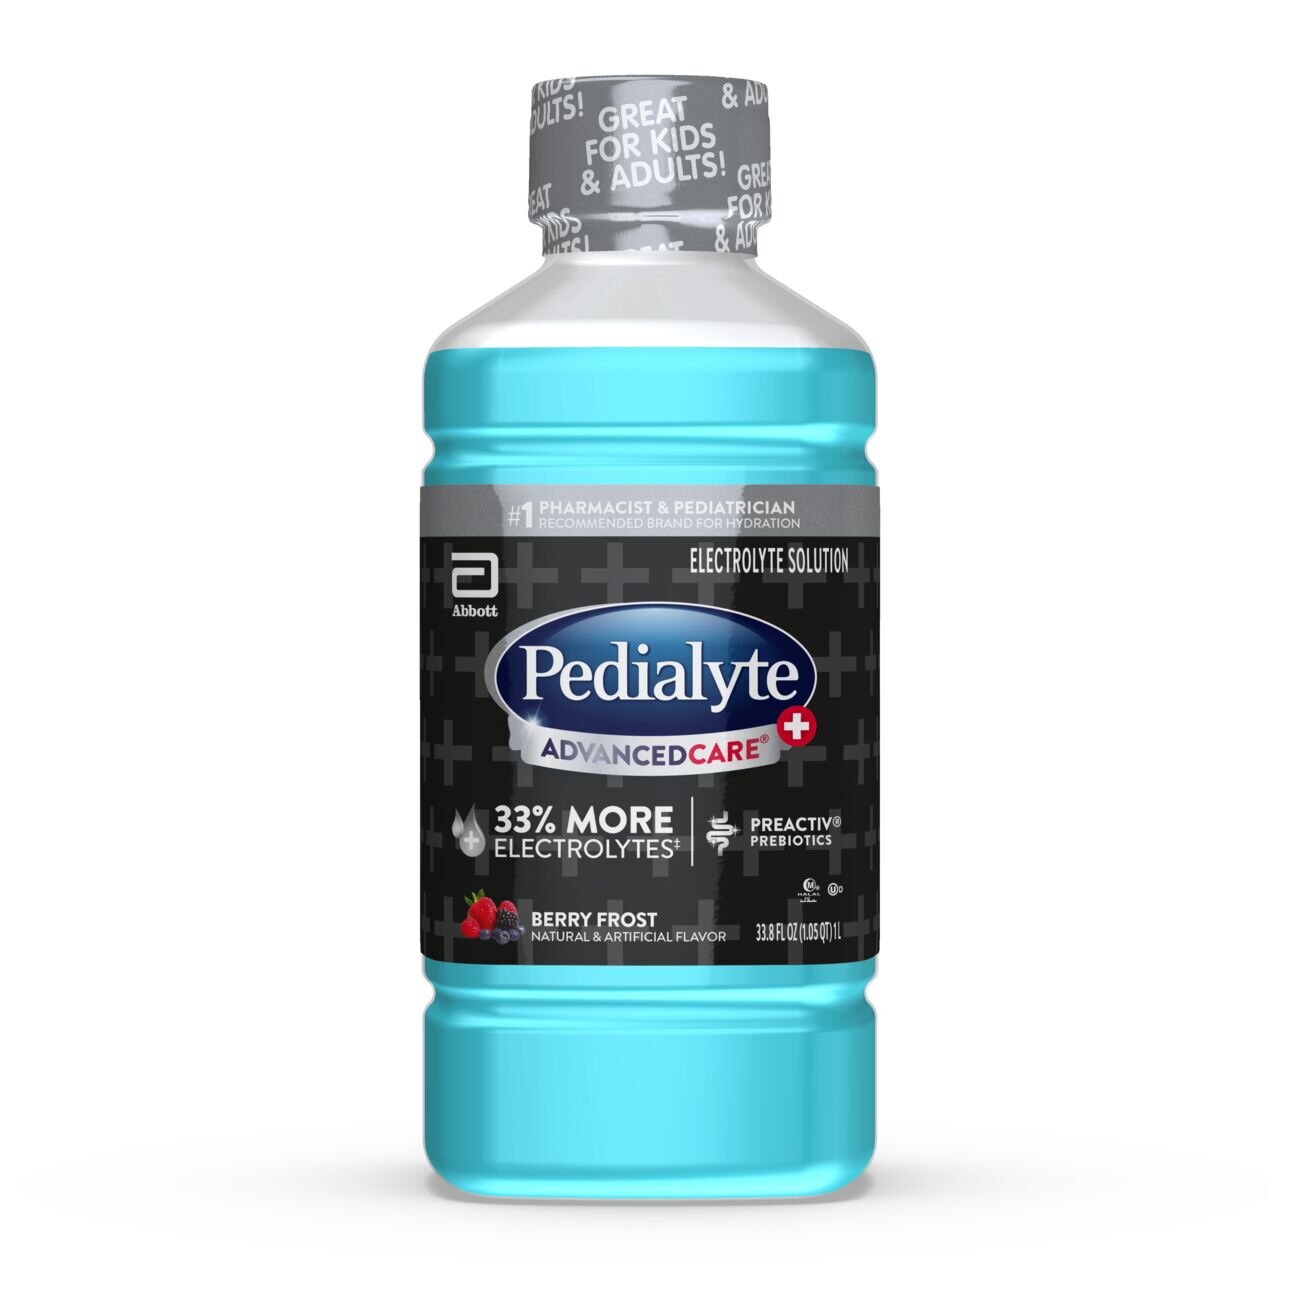 Pedialyte AdvancedCare Plus Electrolyte Solution, Berry Frost, 33.8 OZ